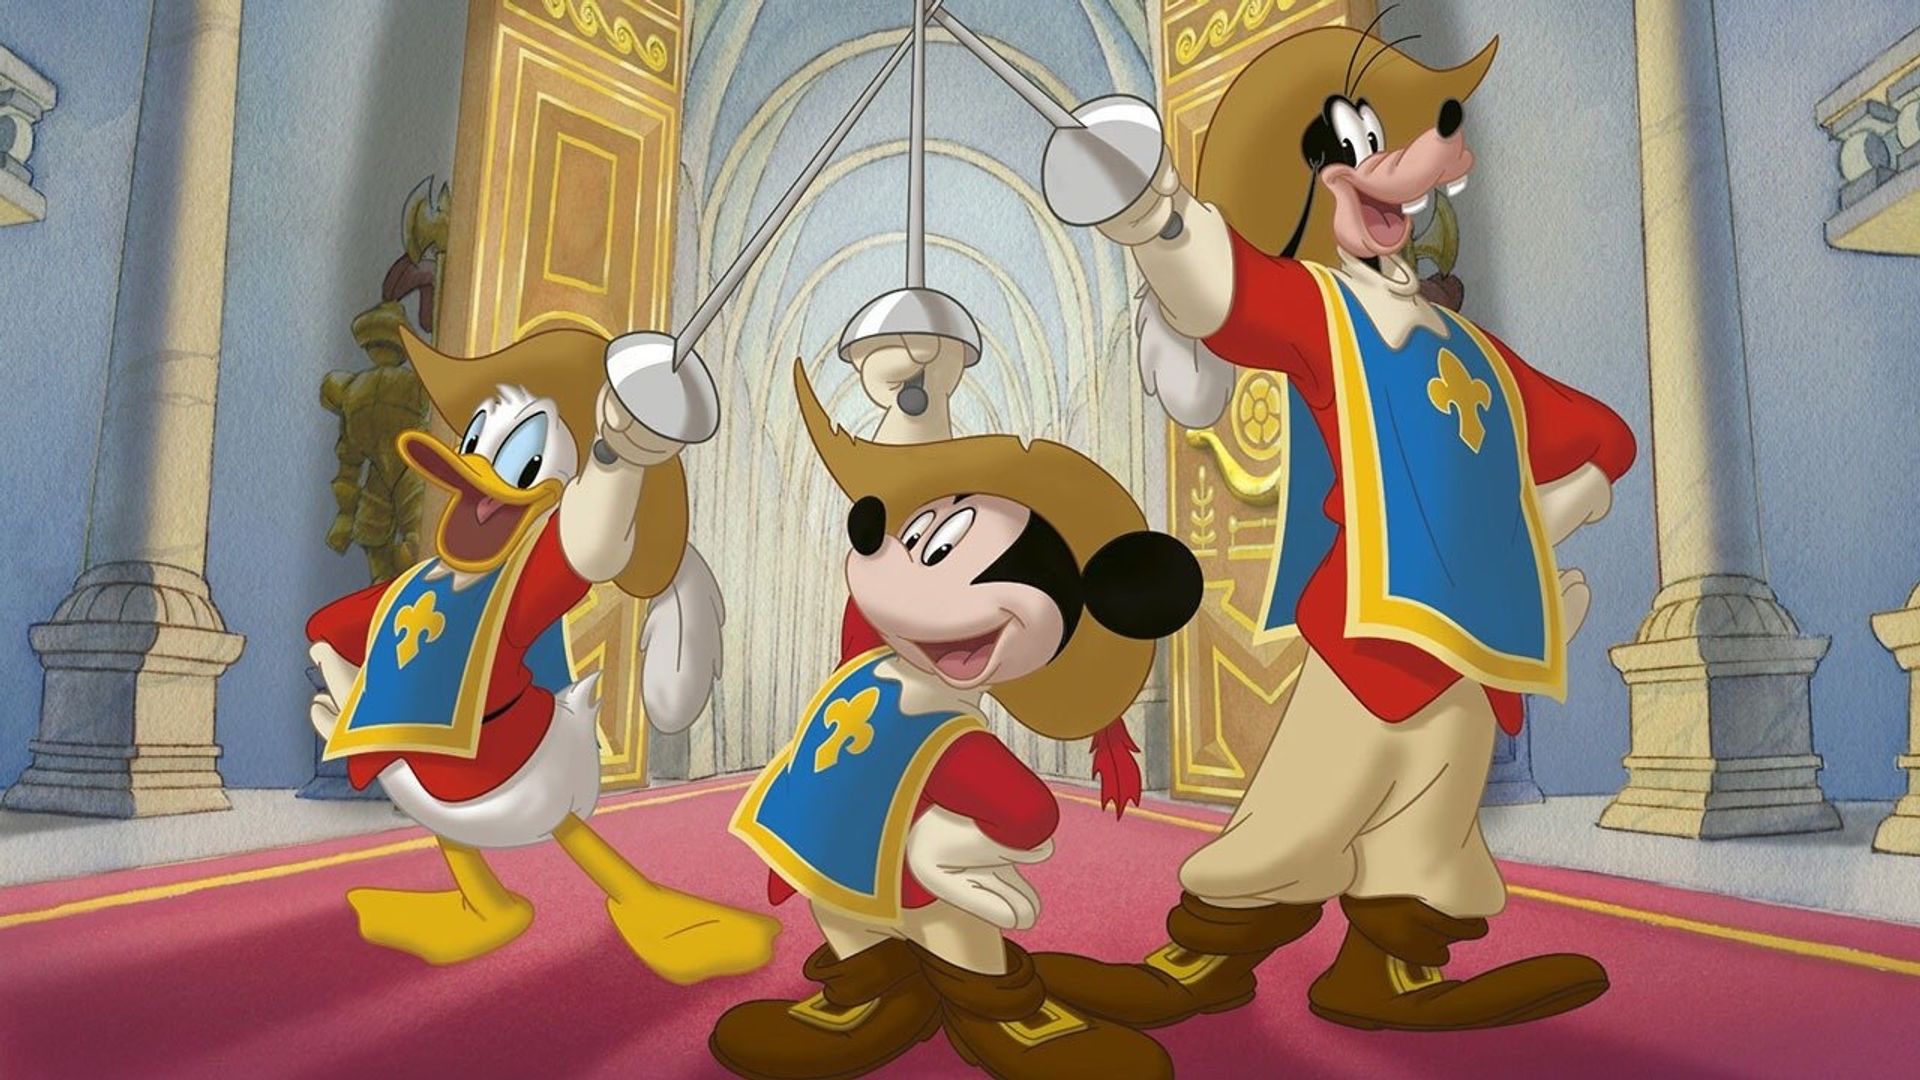 Mickey, Donald, Goofy: The Three Musketeers Backdrop